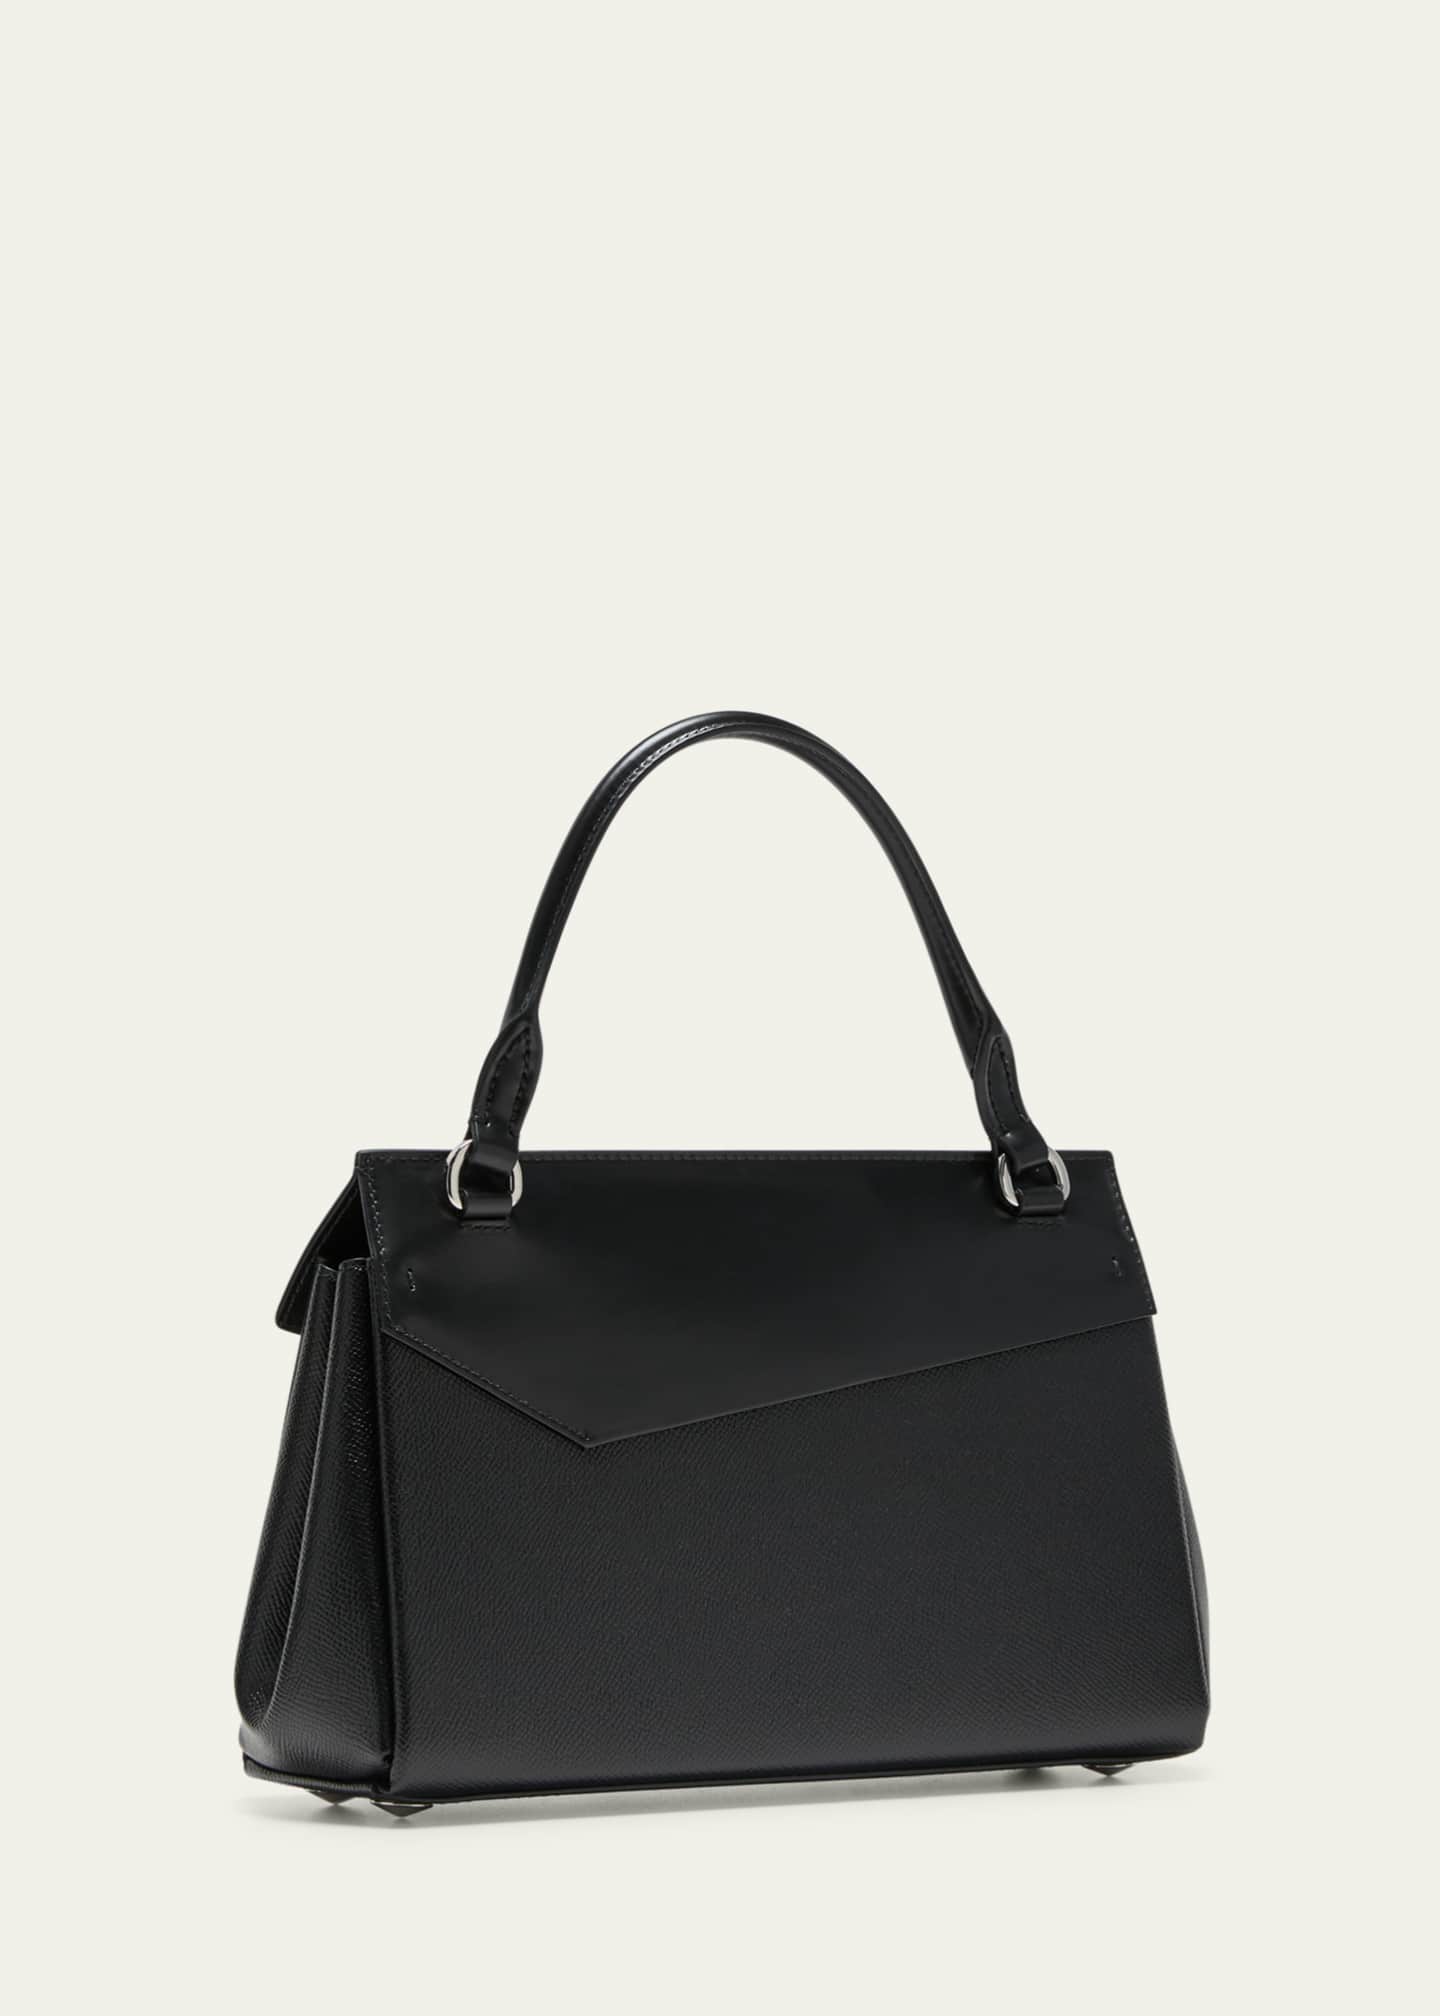 Maison Margiela Snatched Small Leather Clutch Bag - Bergdorf Goodman